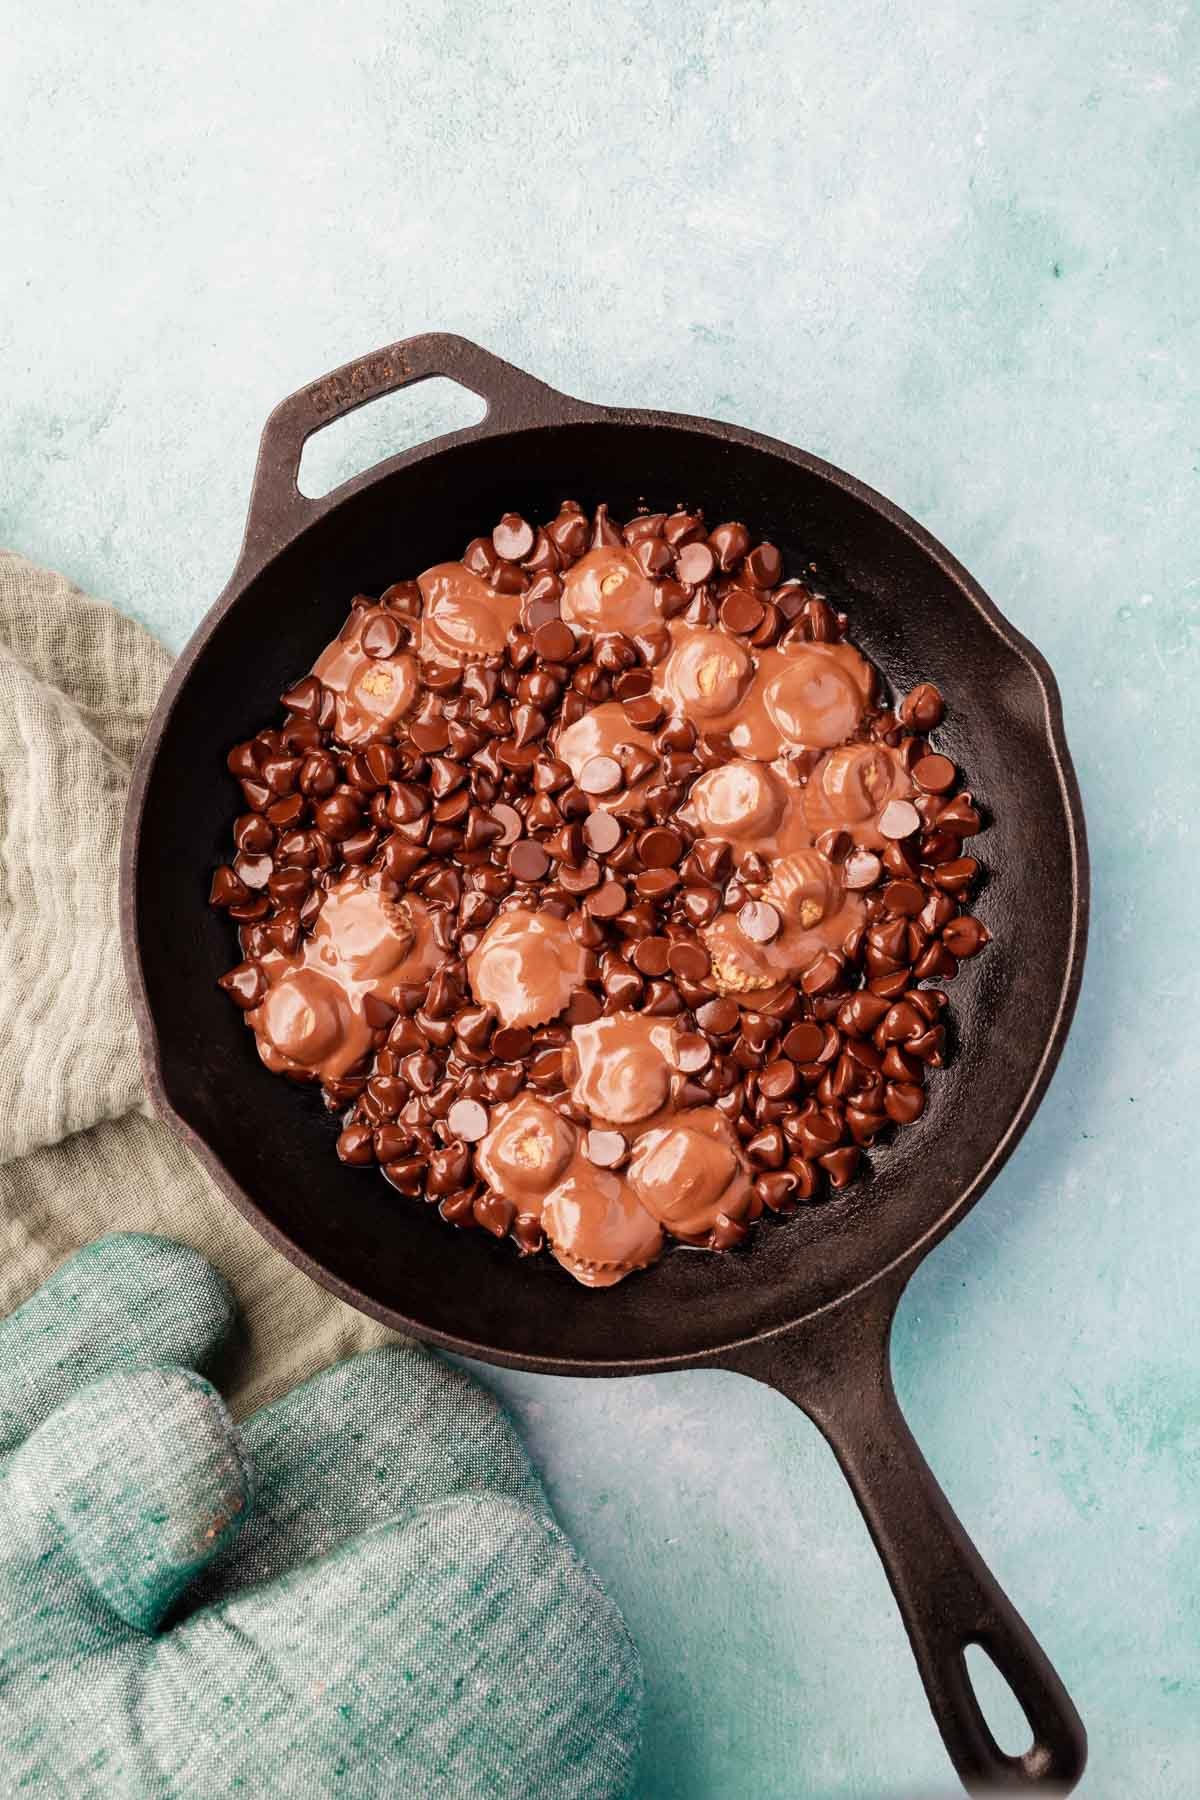 Glossy chocolate chips and peanut butter cups starting to melt in a cast iron skillet on a blue background.